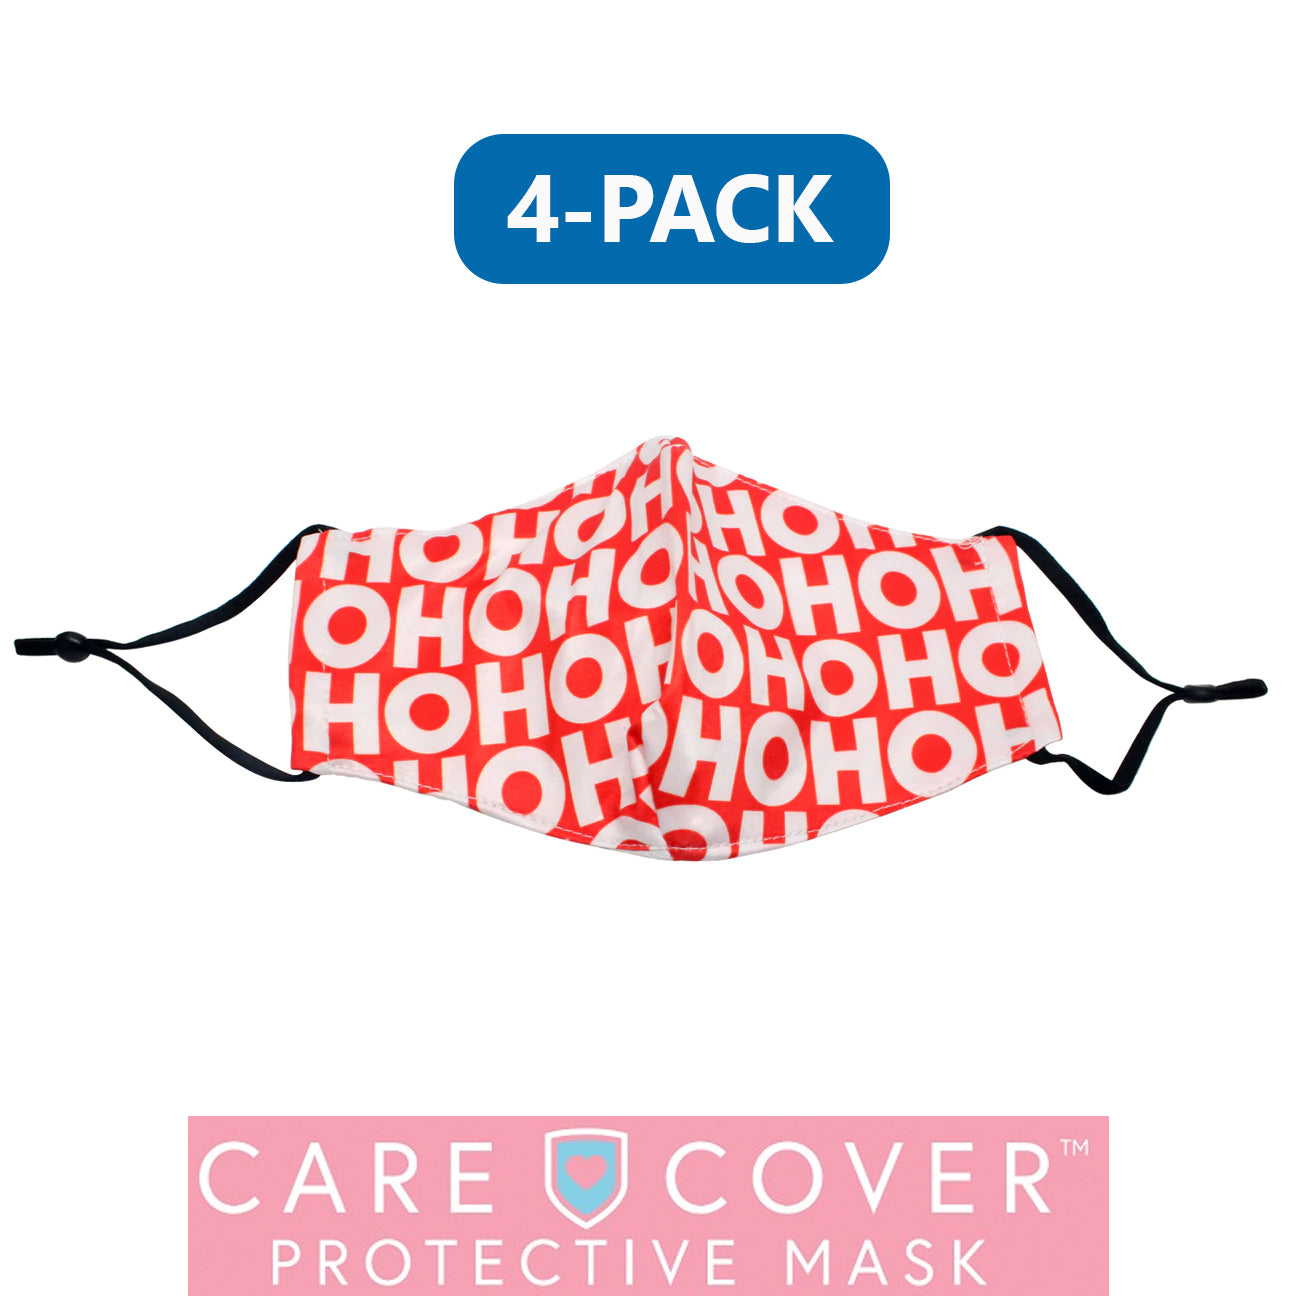 Care Cover Protective Cotton lining Face Mask "4-PACK"